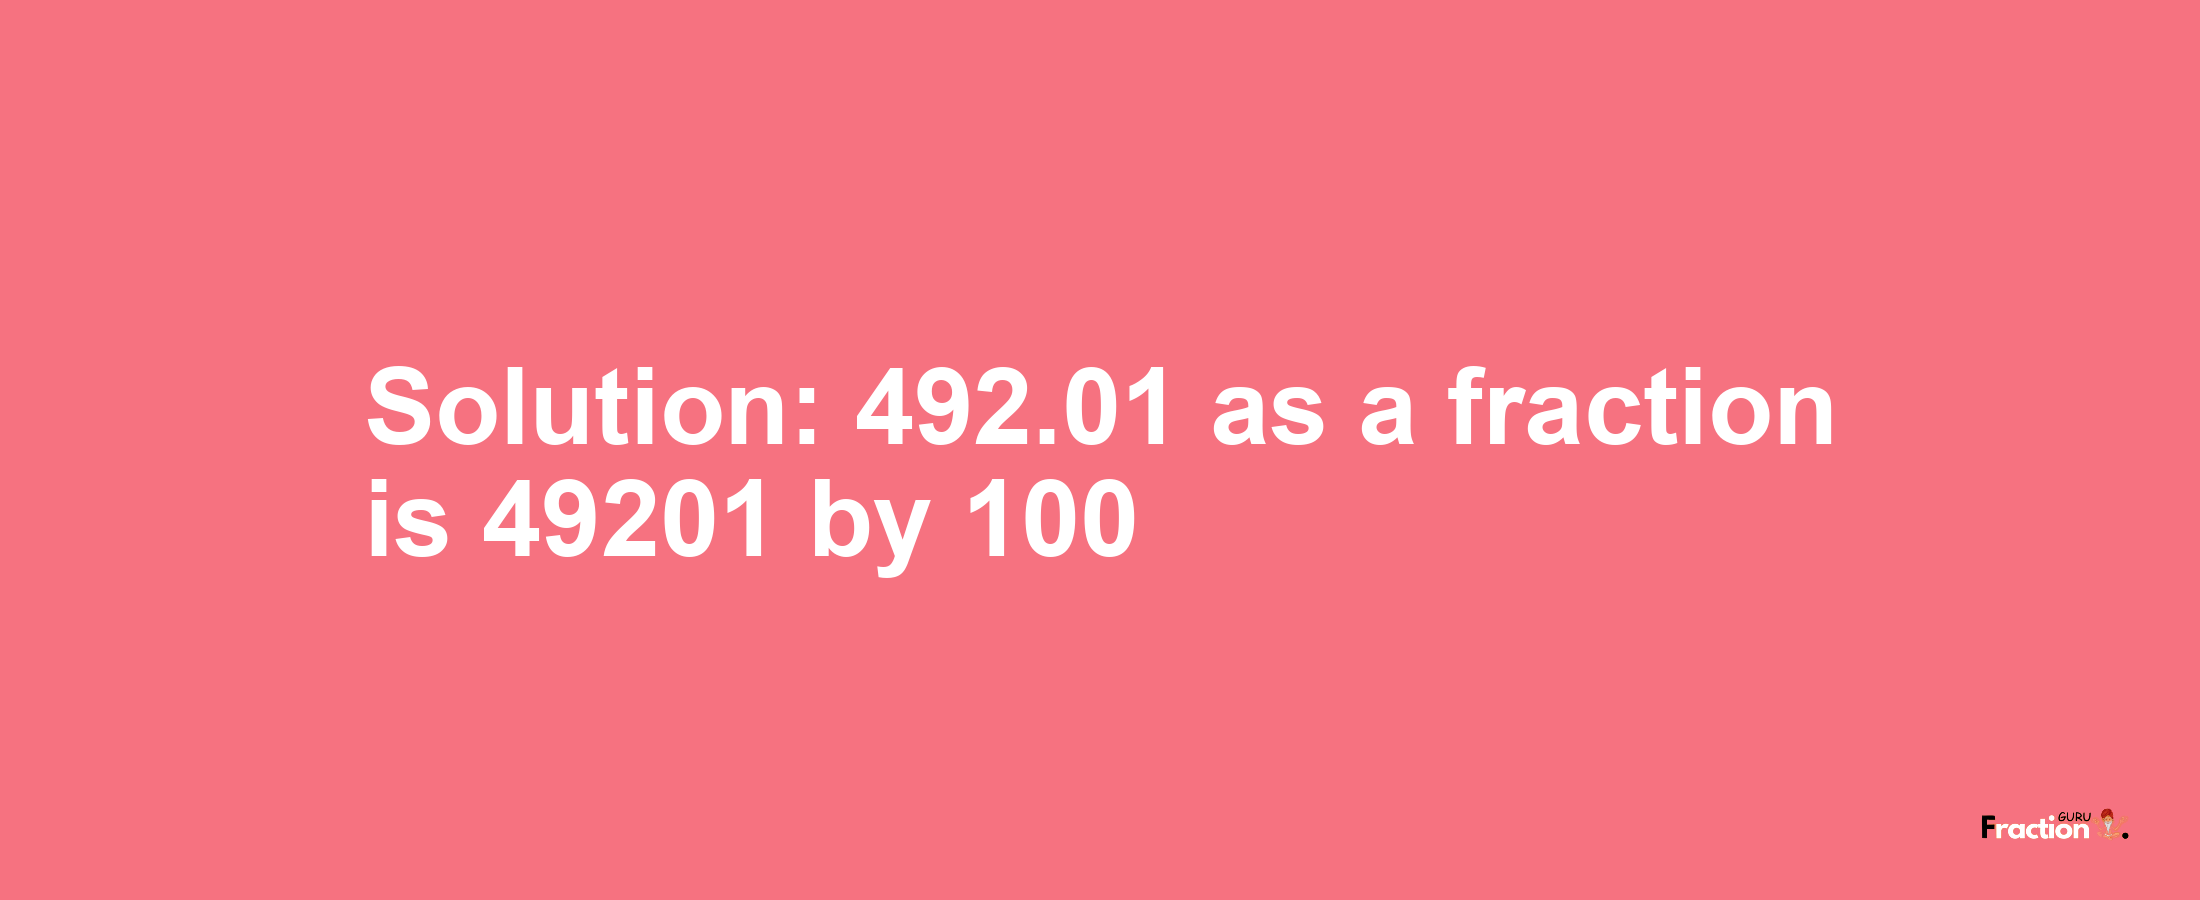 Solution:492.01 as a fraction is 49201/100